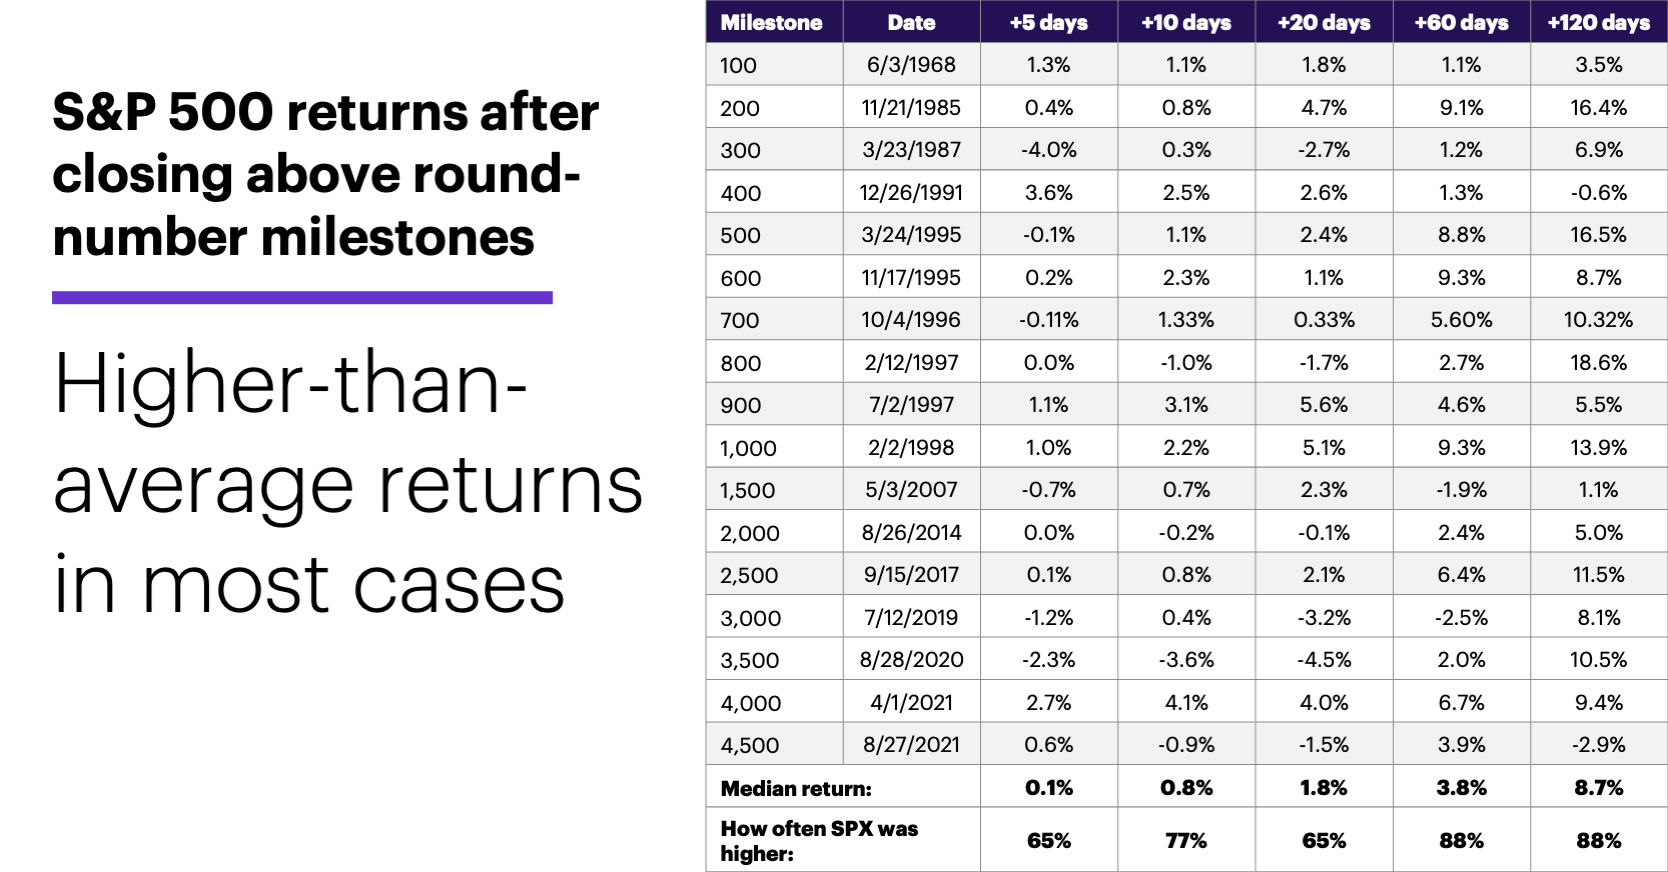 Chart 2: S&P 500 returns after closing above round-number milestones. Higher-than-average returns in most cases.